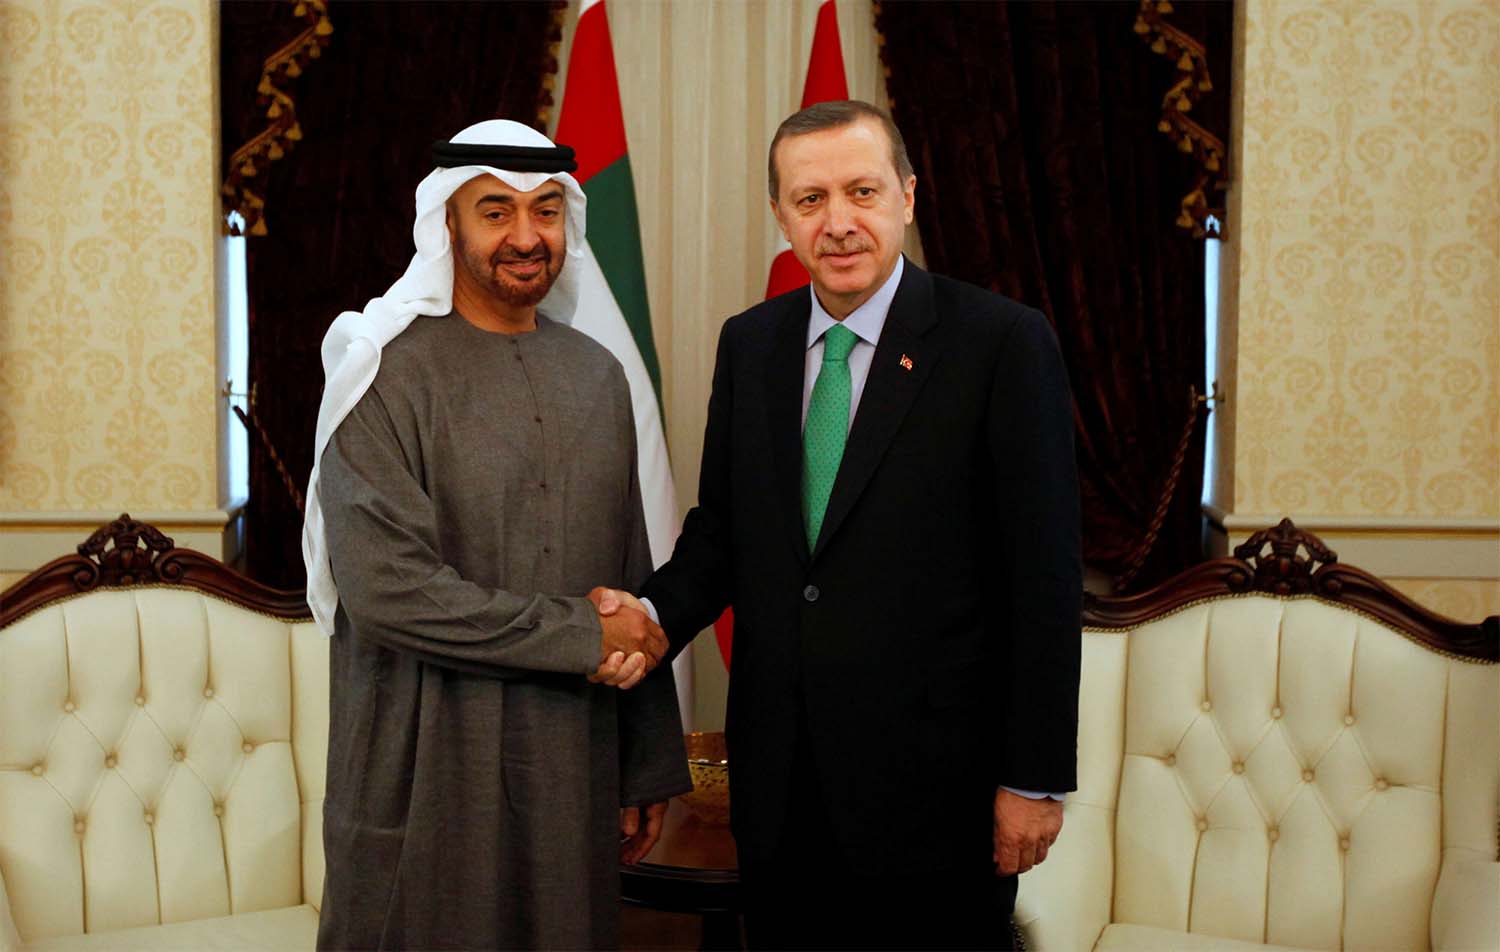 The UAE and Turkey have focused on economic ties and de-escalation